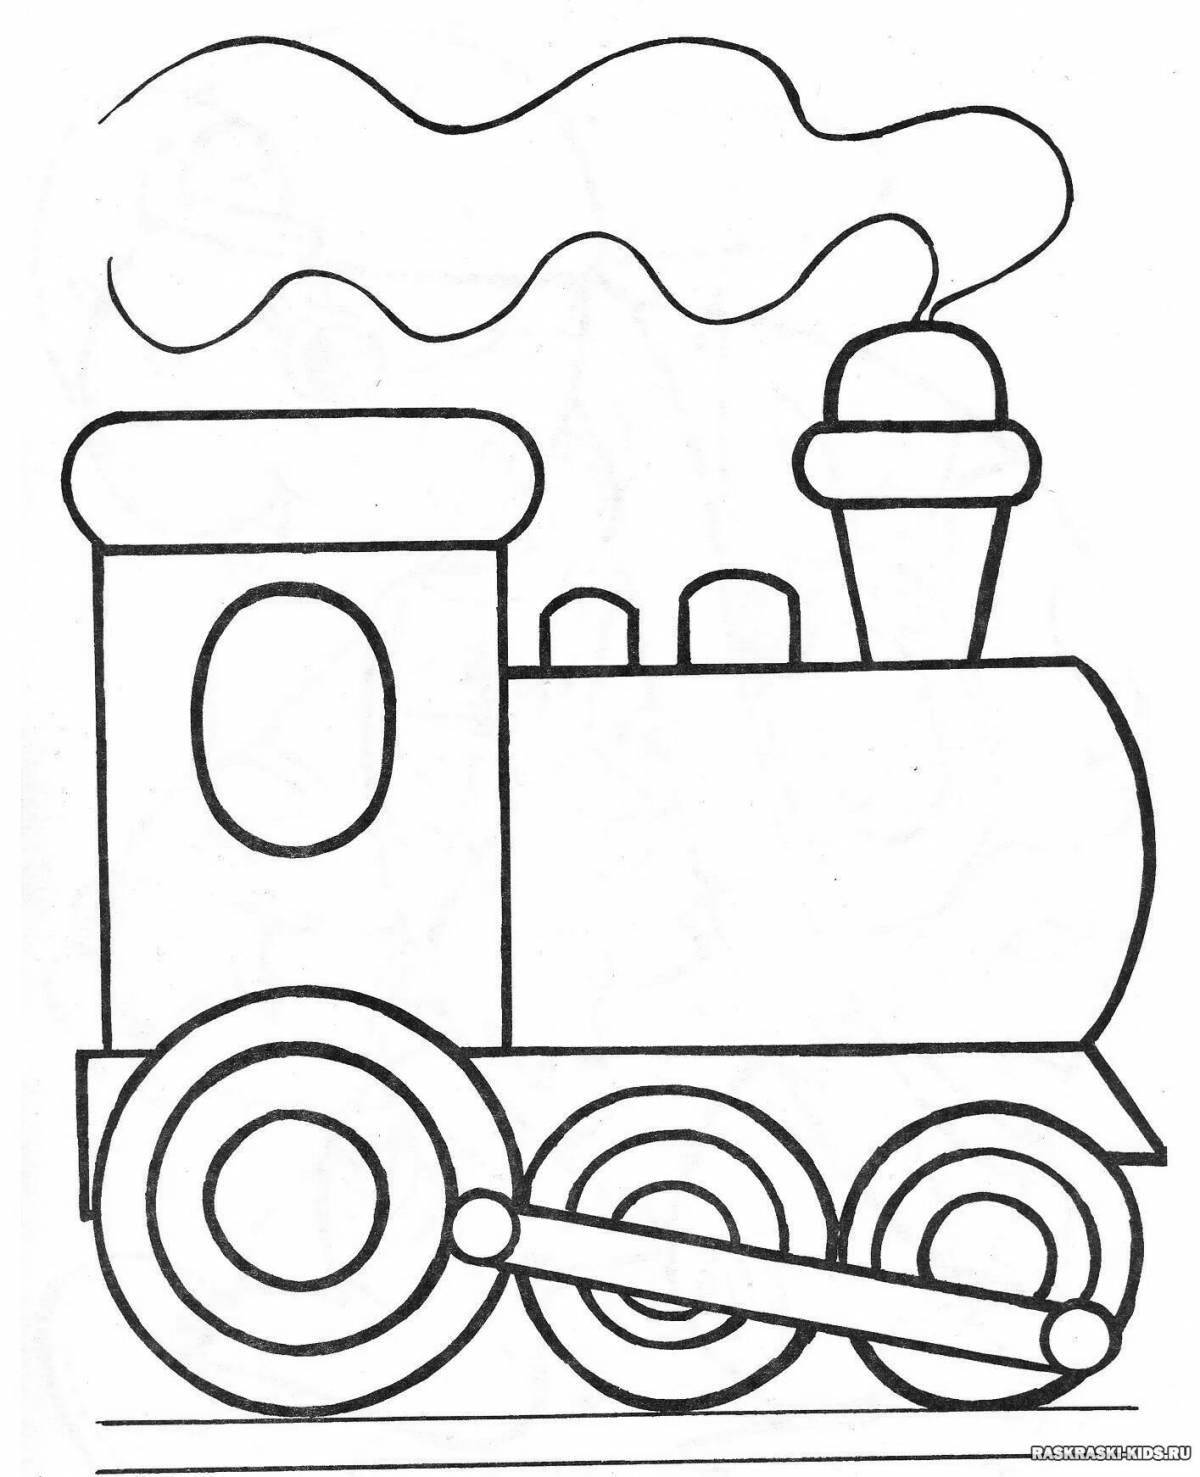 Great locomotive coloring page